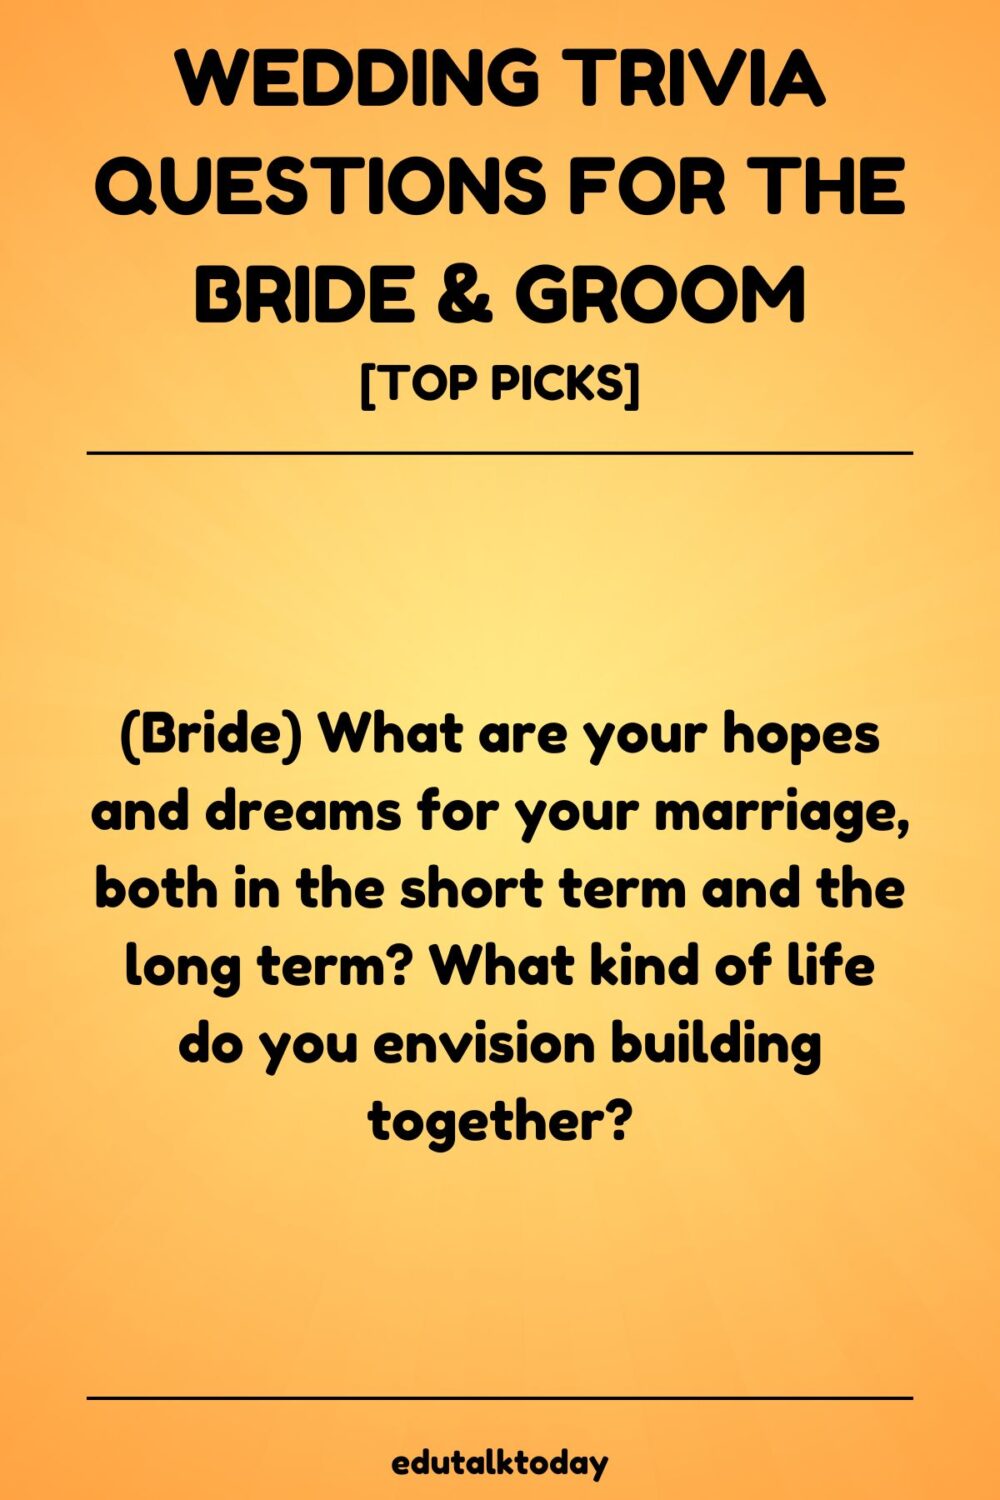 Wedding Trivia Questions For Bride and Groom